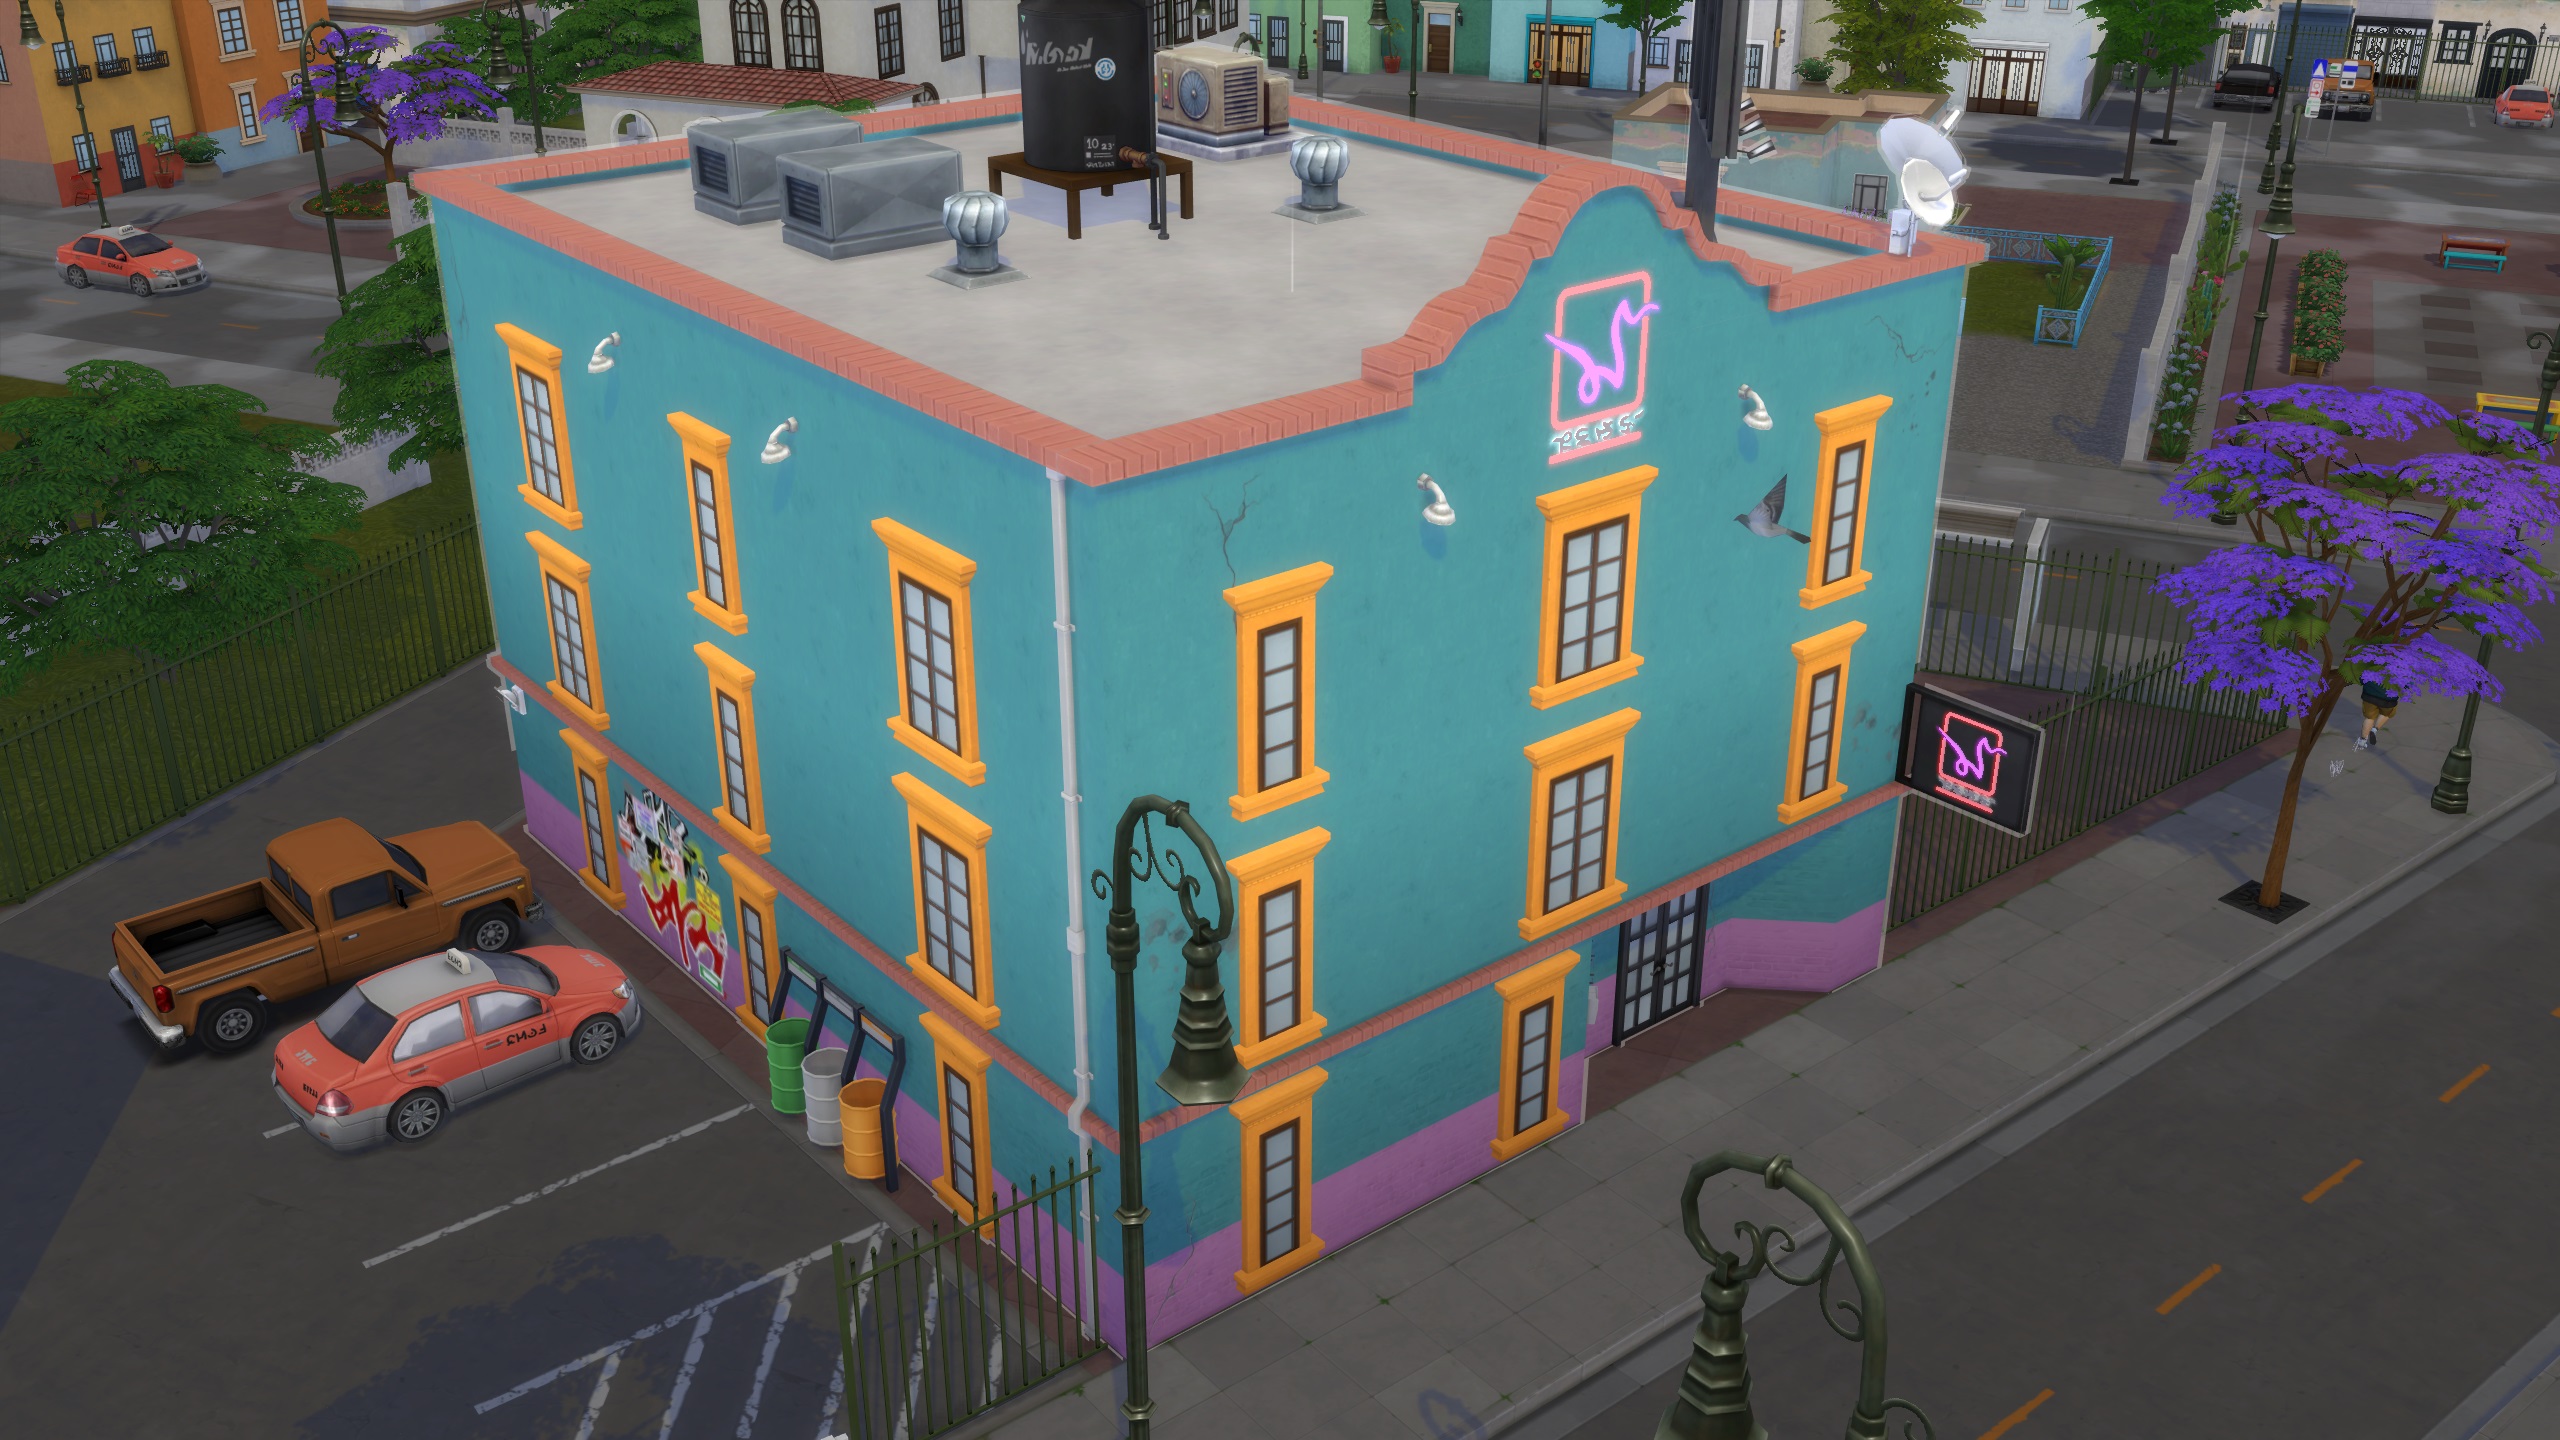  How to find the 'Wealthy Weirdo' at the Beso Rápido Motel in The Sims 4 Lovestruck expansion 